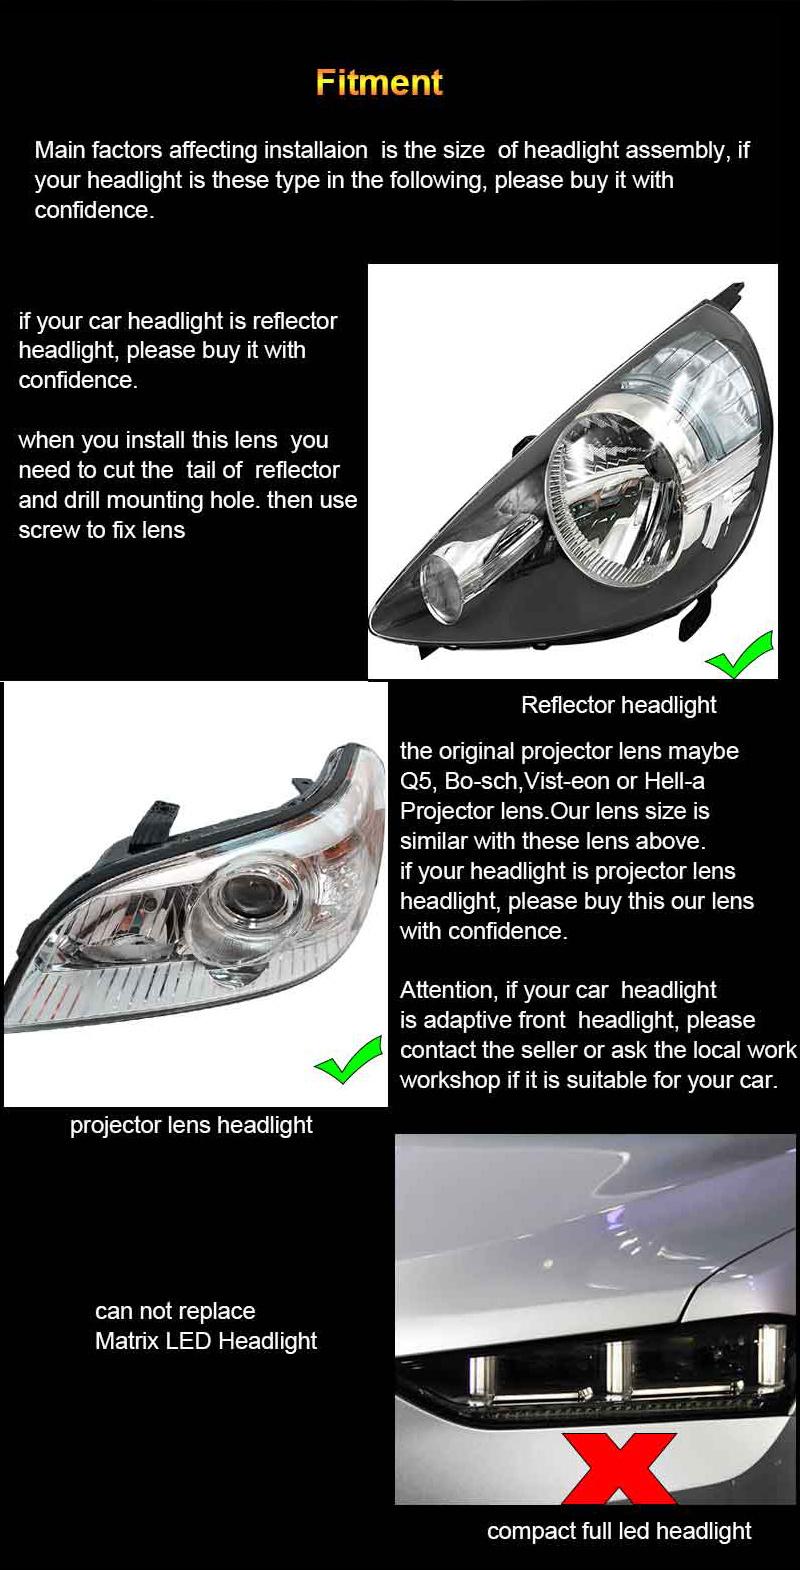 Sanvi Aozoom Hot Sale in Russia USA 3 Inch A8 Bi LED Projector Lens Headlight 44W 5500K Stable Auto LED Headlight Motorcycle LED Headlight Replacement